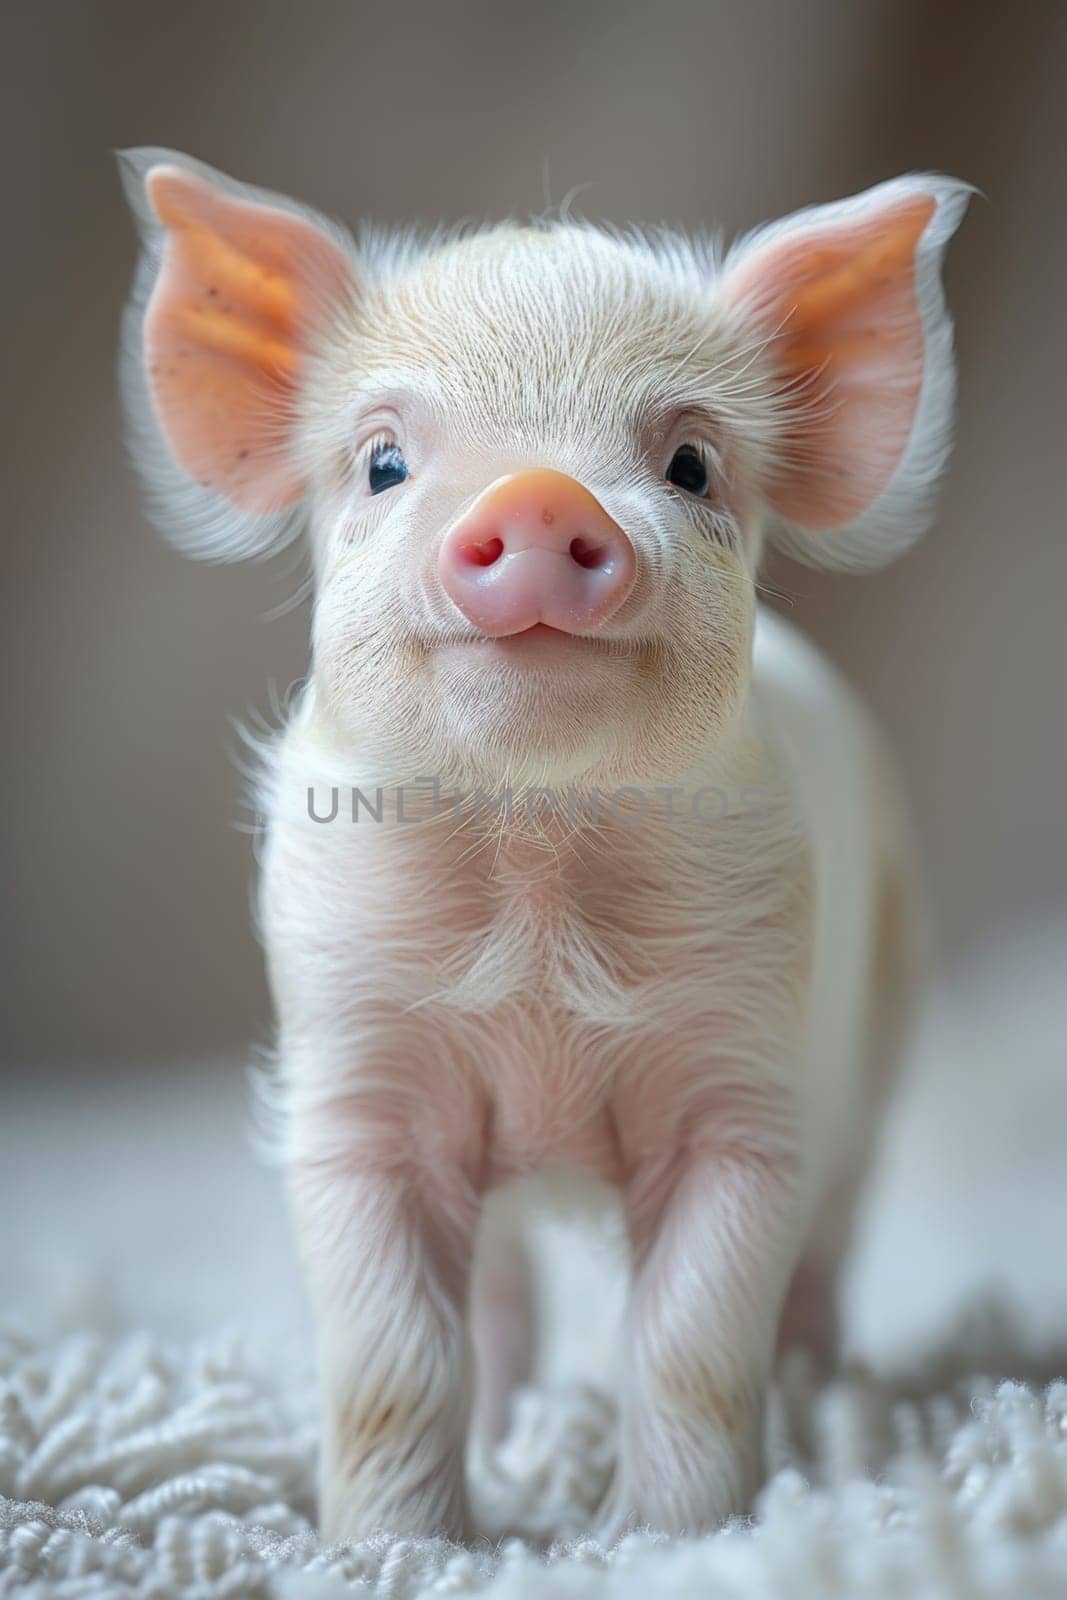 A newborn piglet poses for the camera.